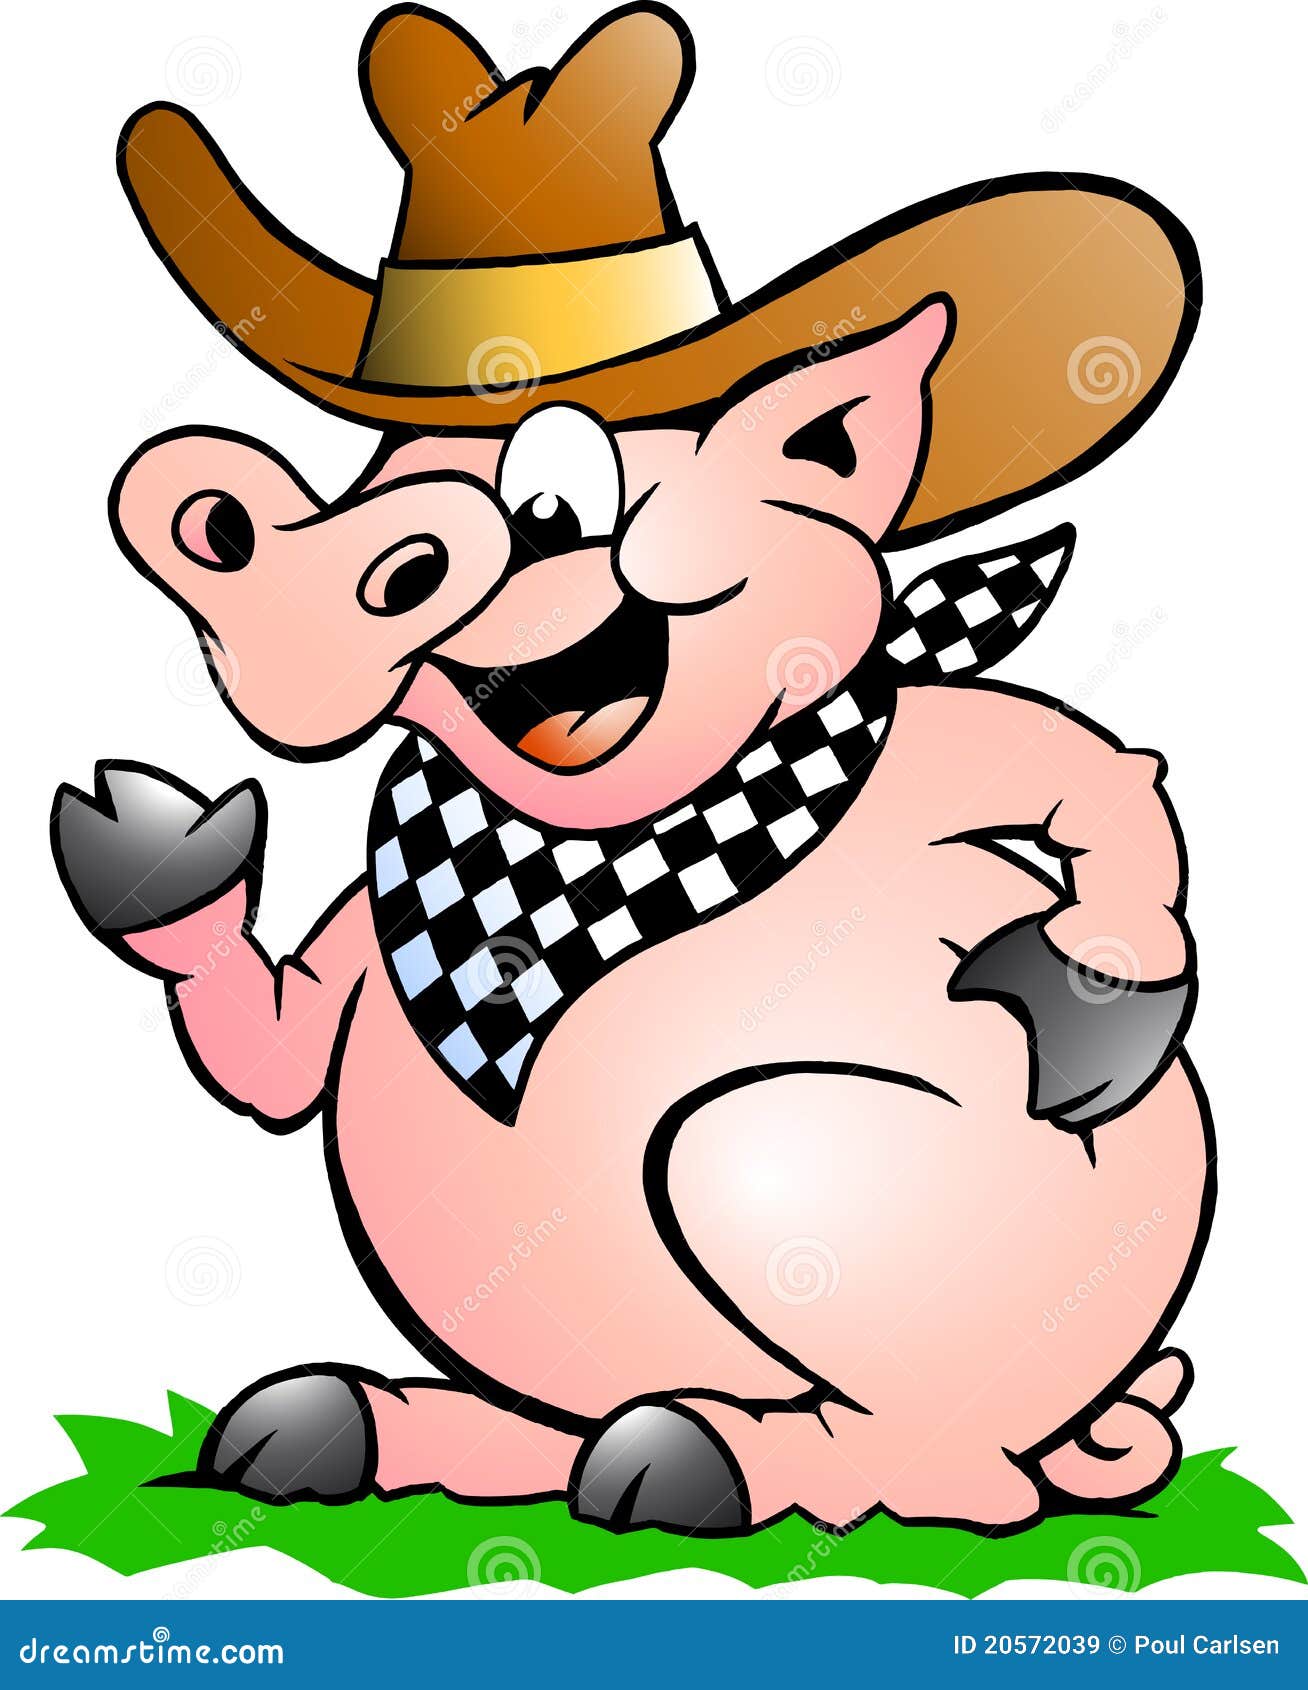 barbecue clipart pig - photo #22